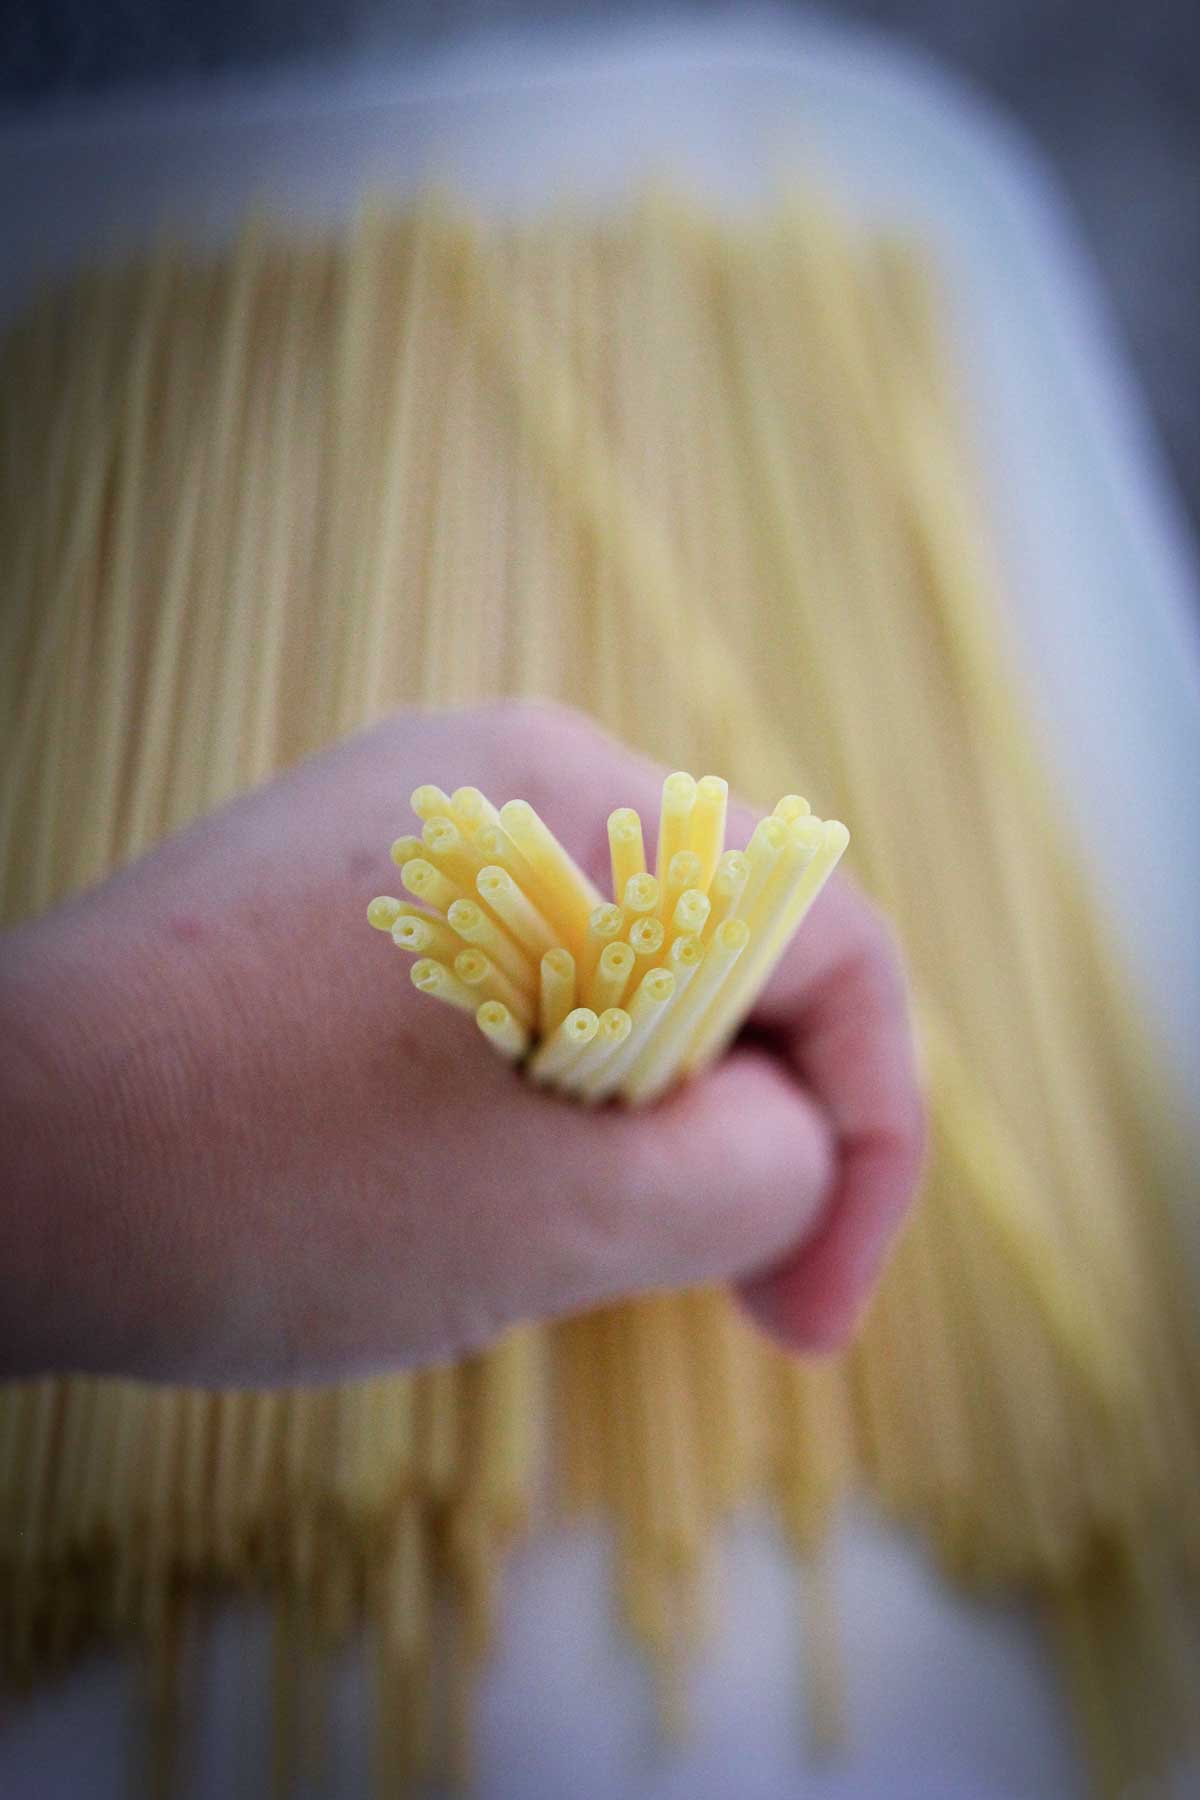 A hand showing bucatini pasta, uncooked from the side so you can see the tubular shape with a hole in it.